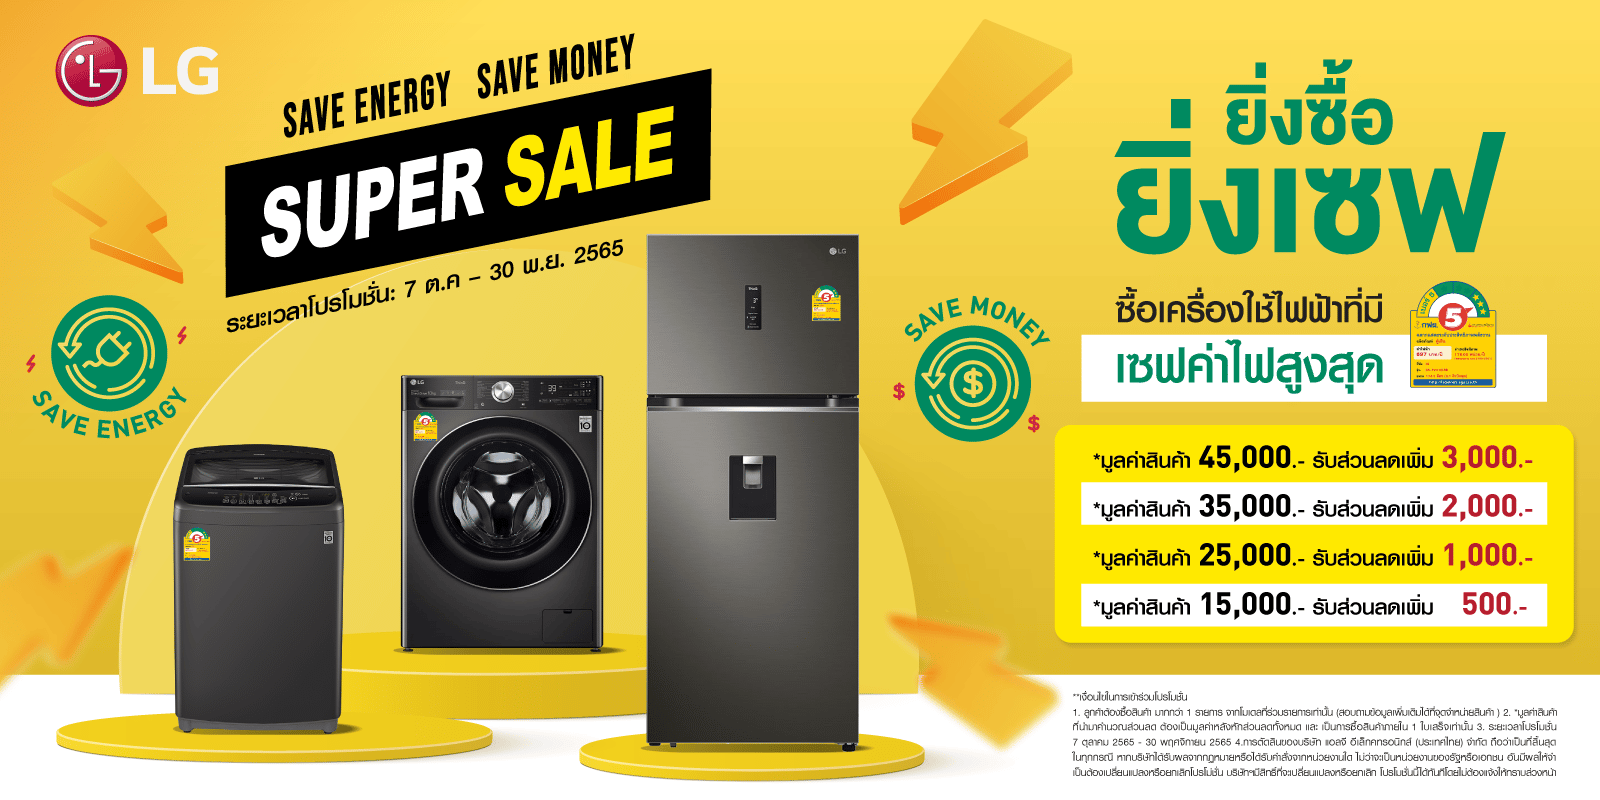 - LG Super Sale Promotion for Washing Machine and Refrigerator - ภาพที่ 1